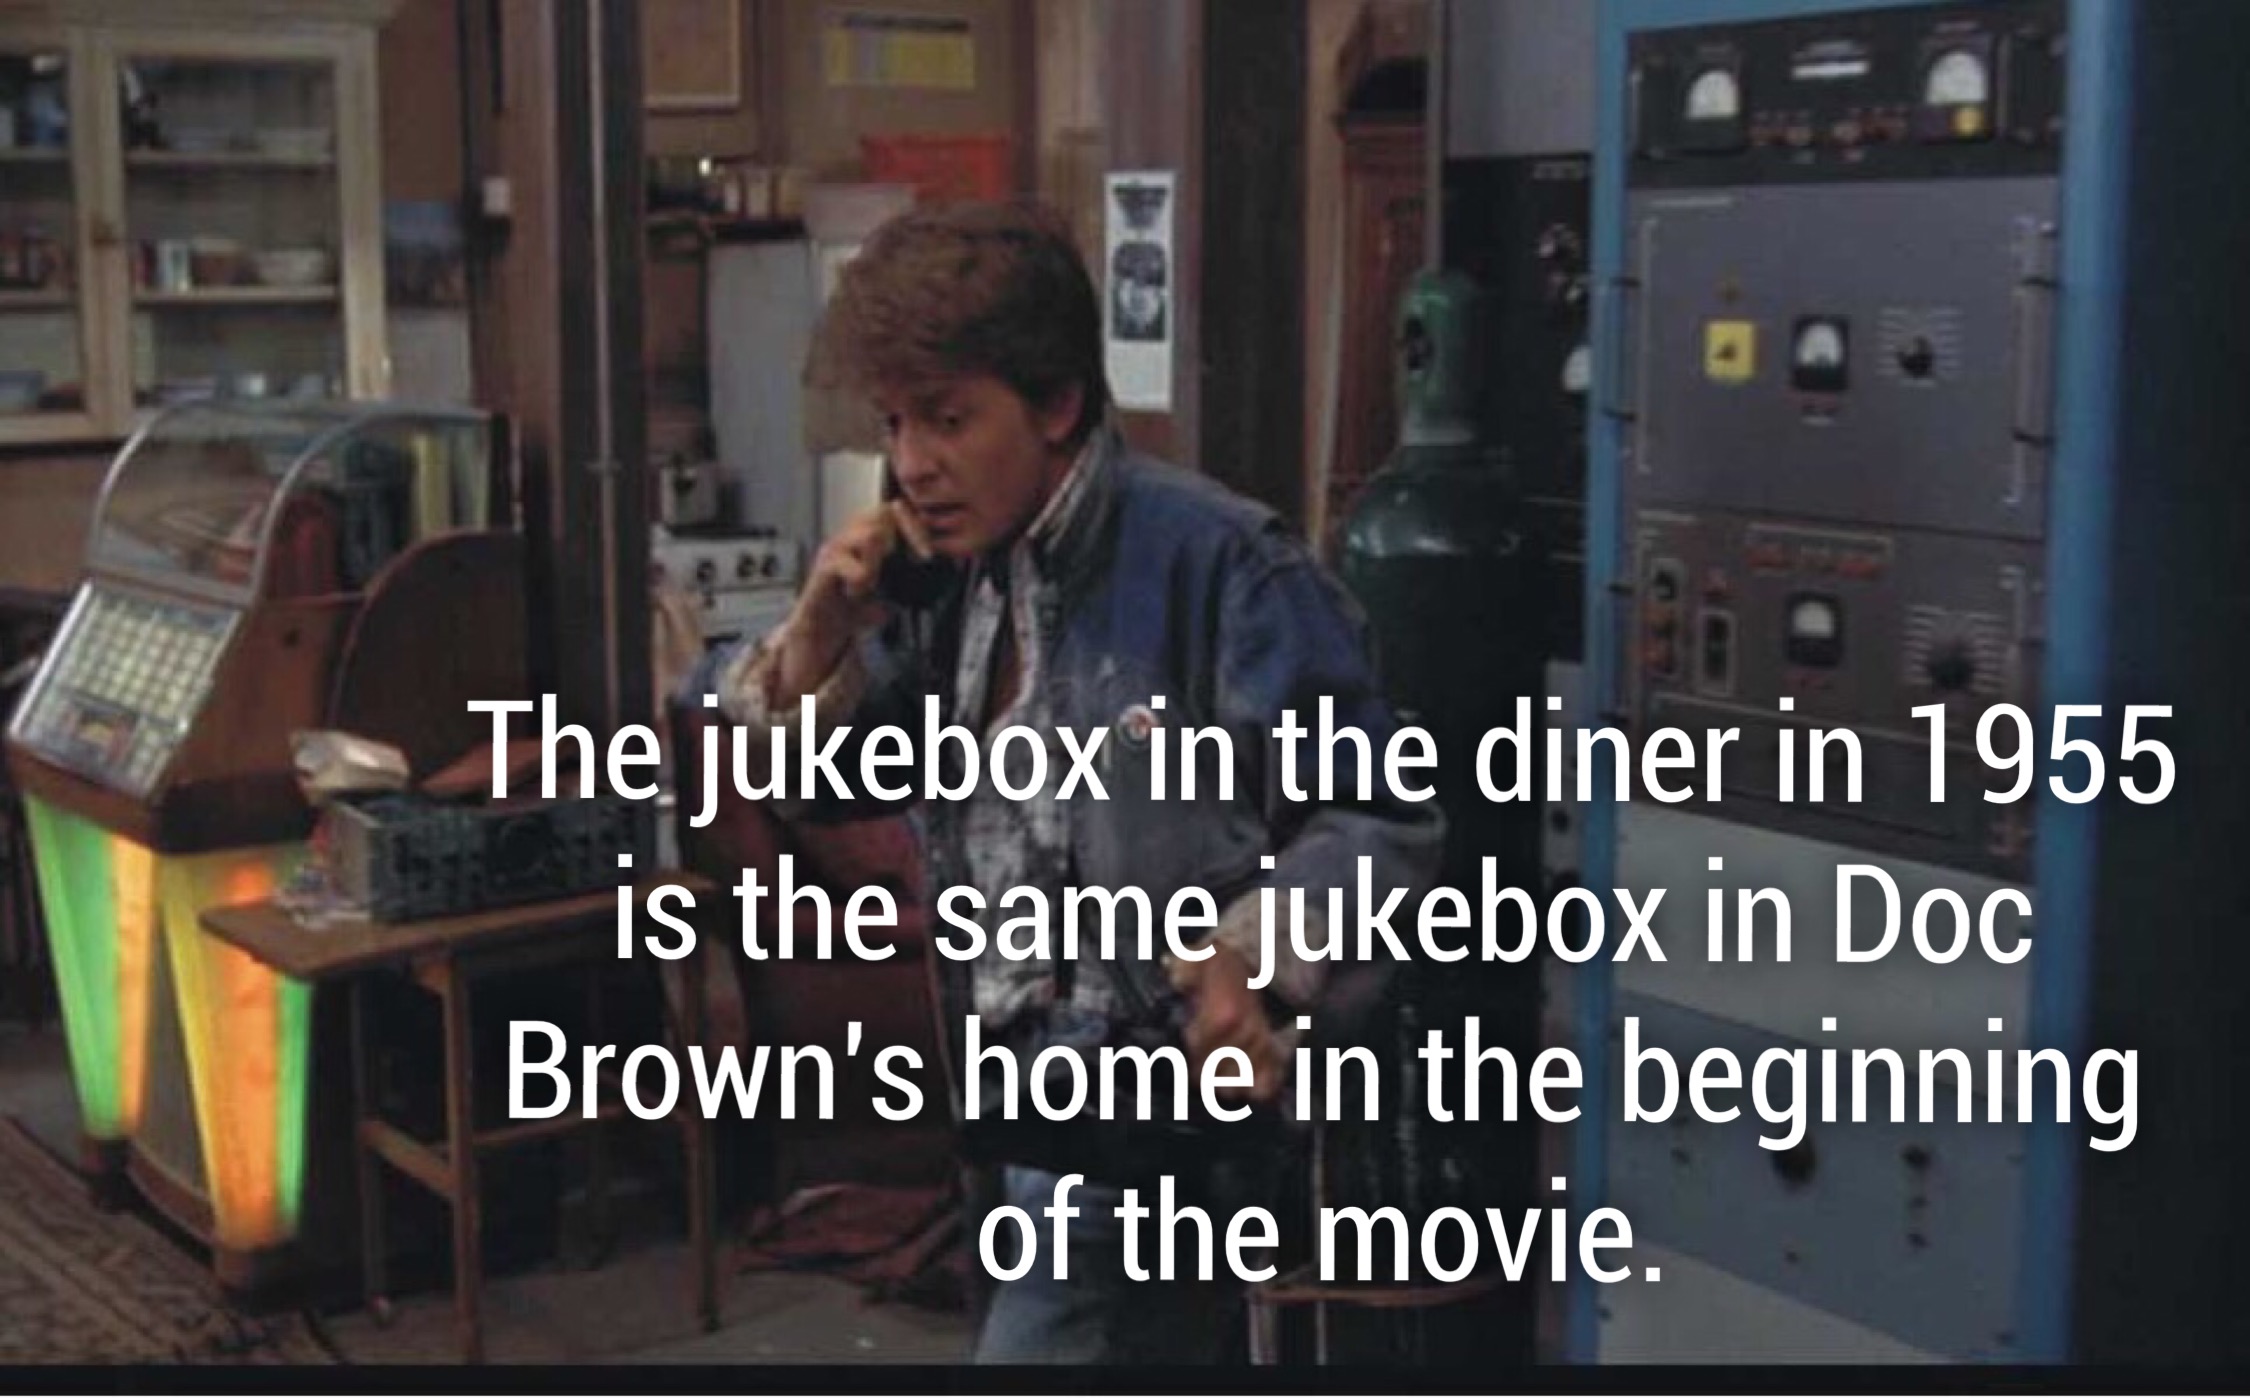 jukebox back to the future - The jukebox in the diner in 1955 is the same jukebox in Doc Brown's home in the beginning of the movie.